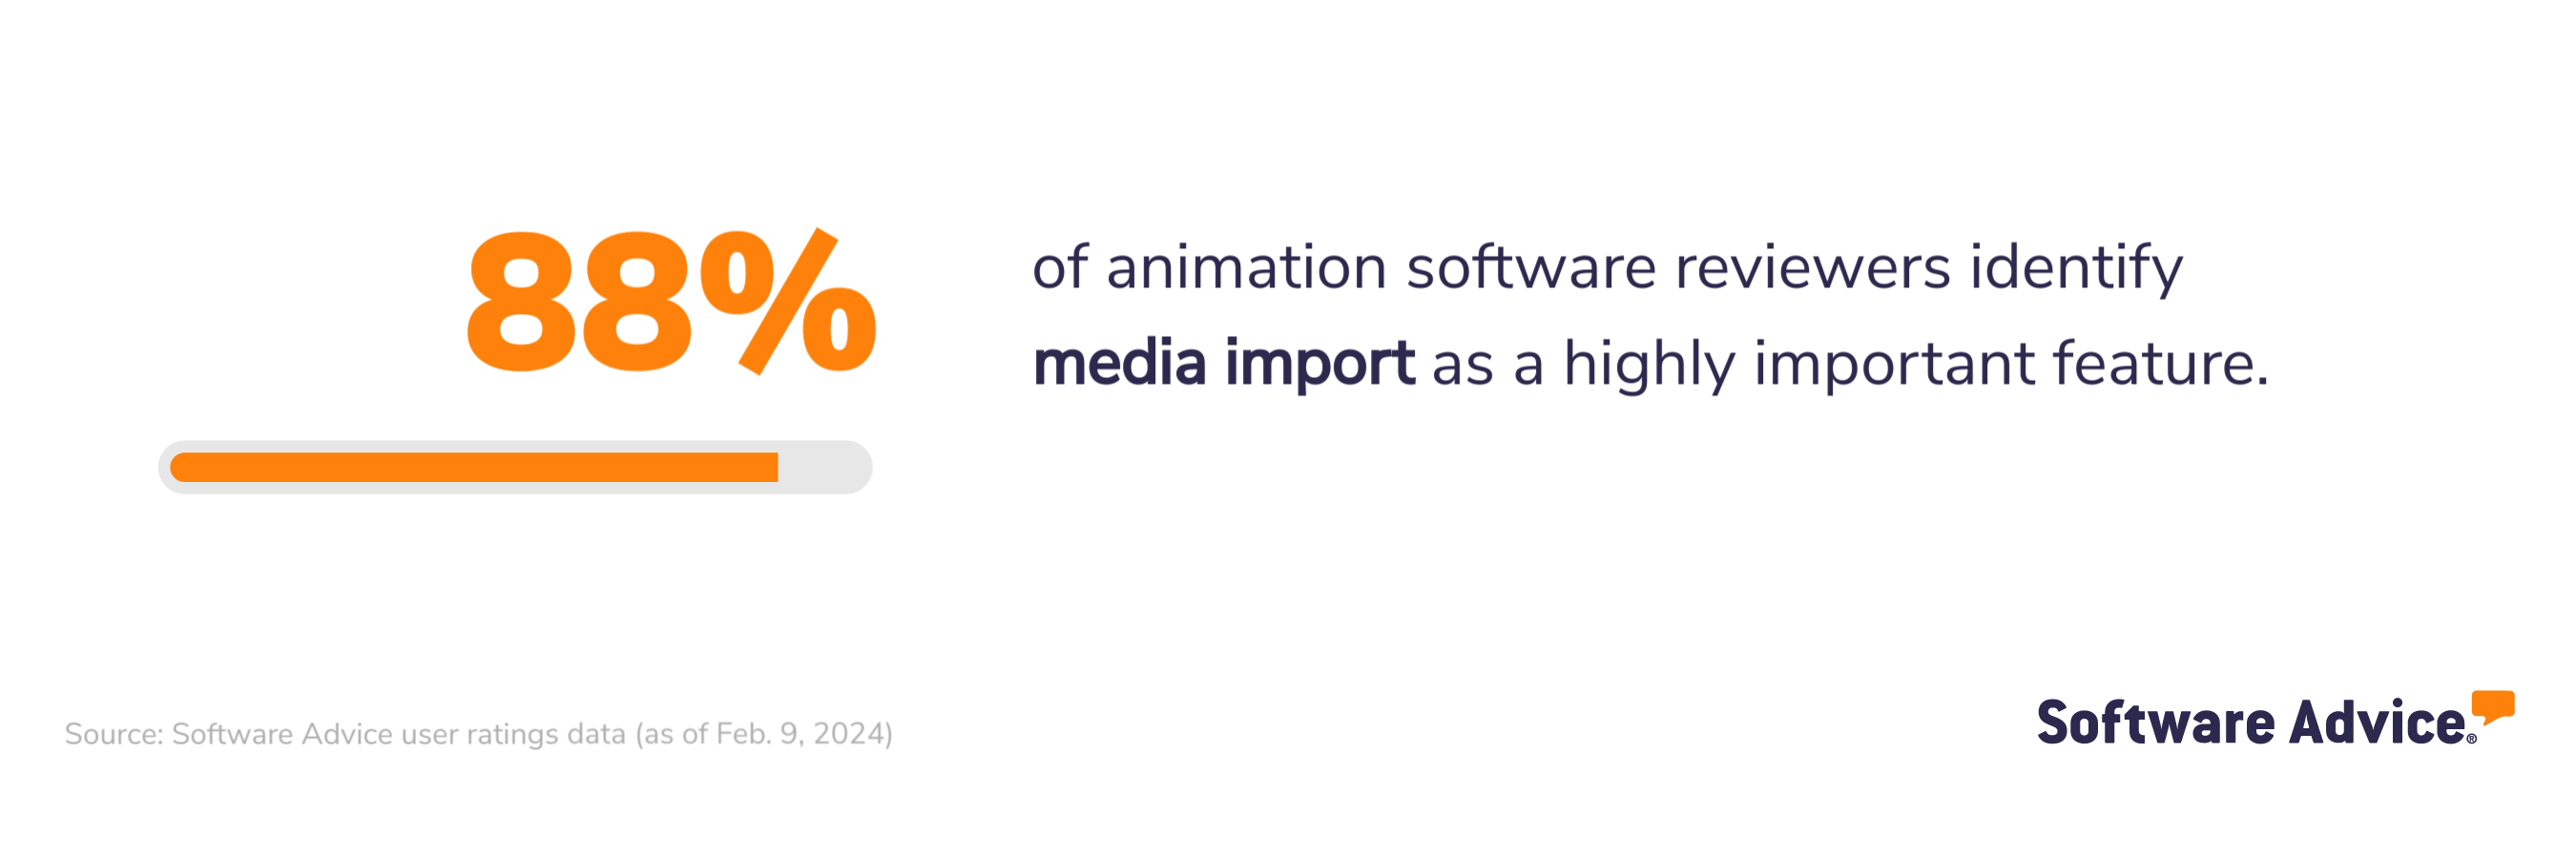 88% of animation software reviewers identify media import as a highly important feature